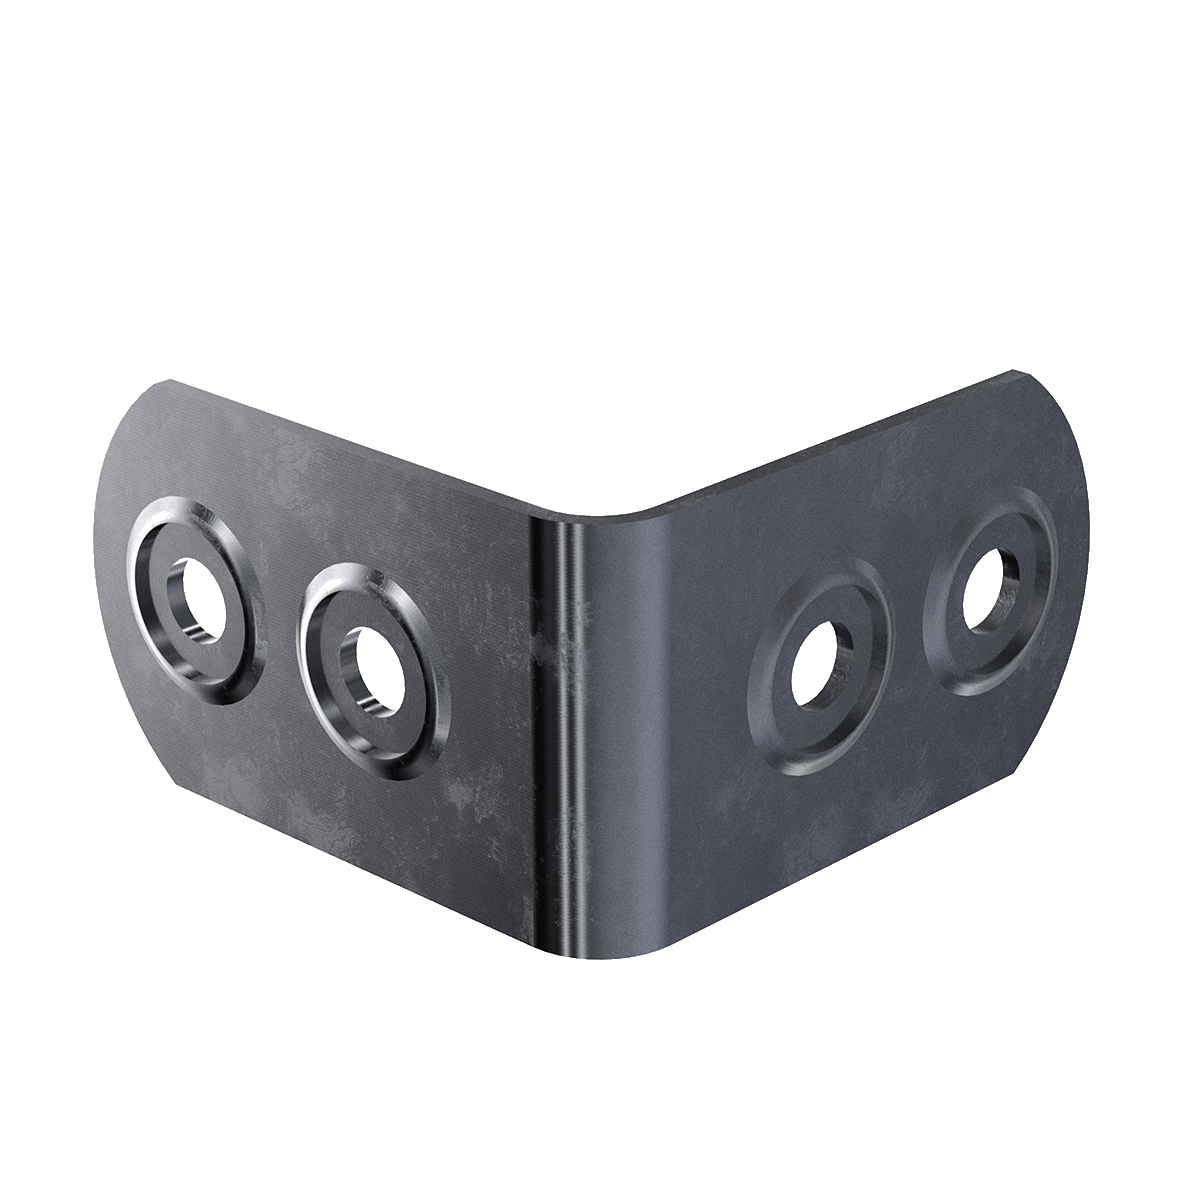 Small Four-Hole Clamp With Rivet Protectors, 3/4 view